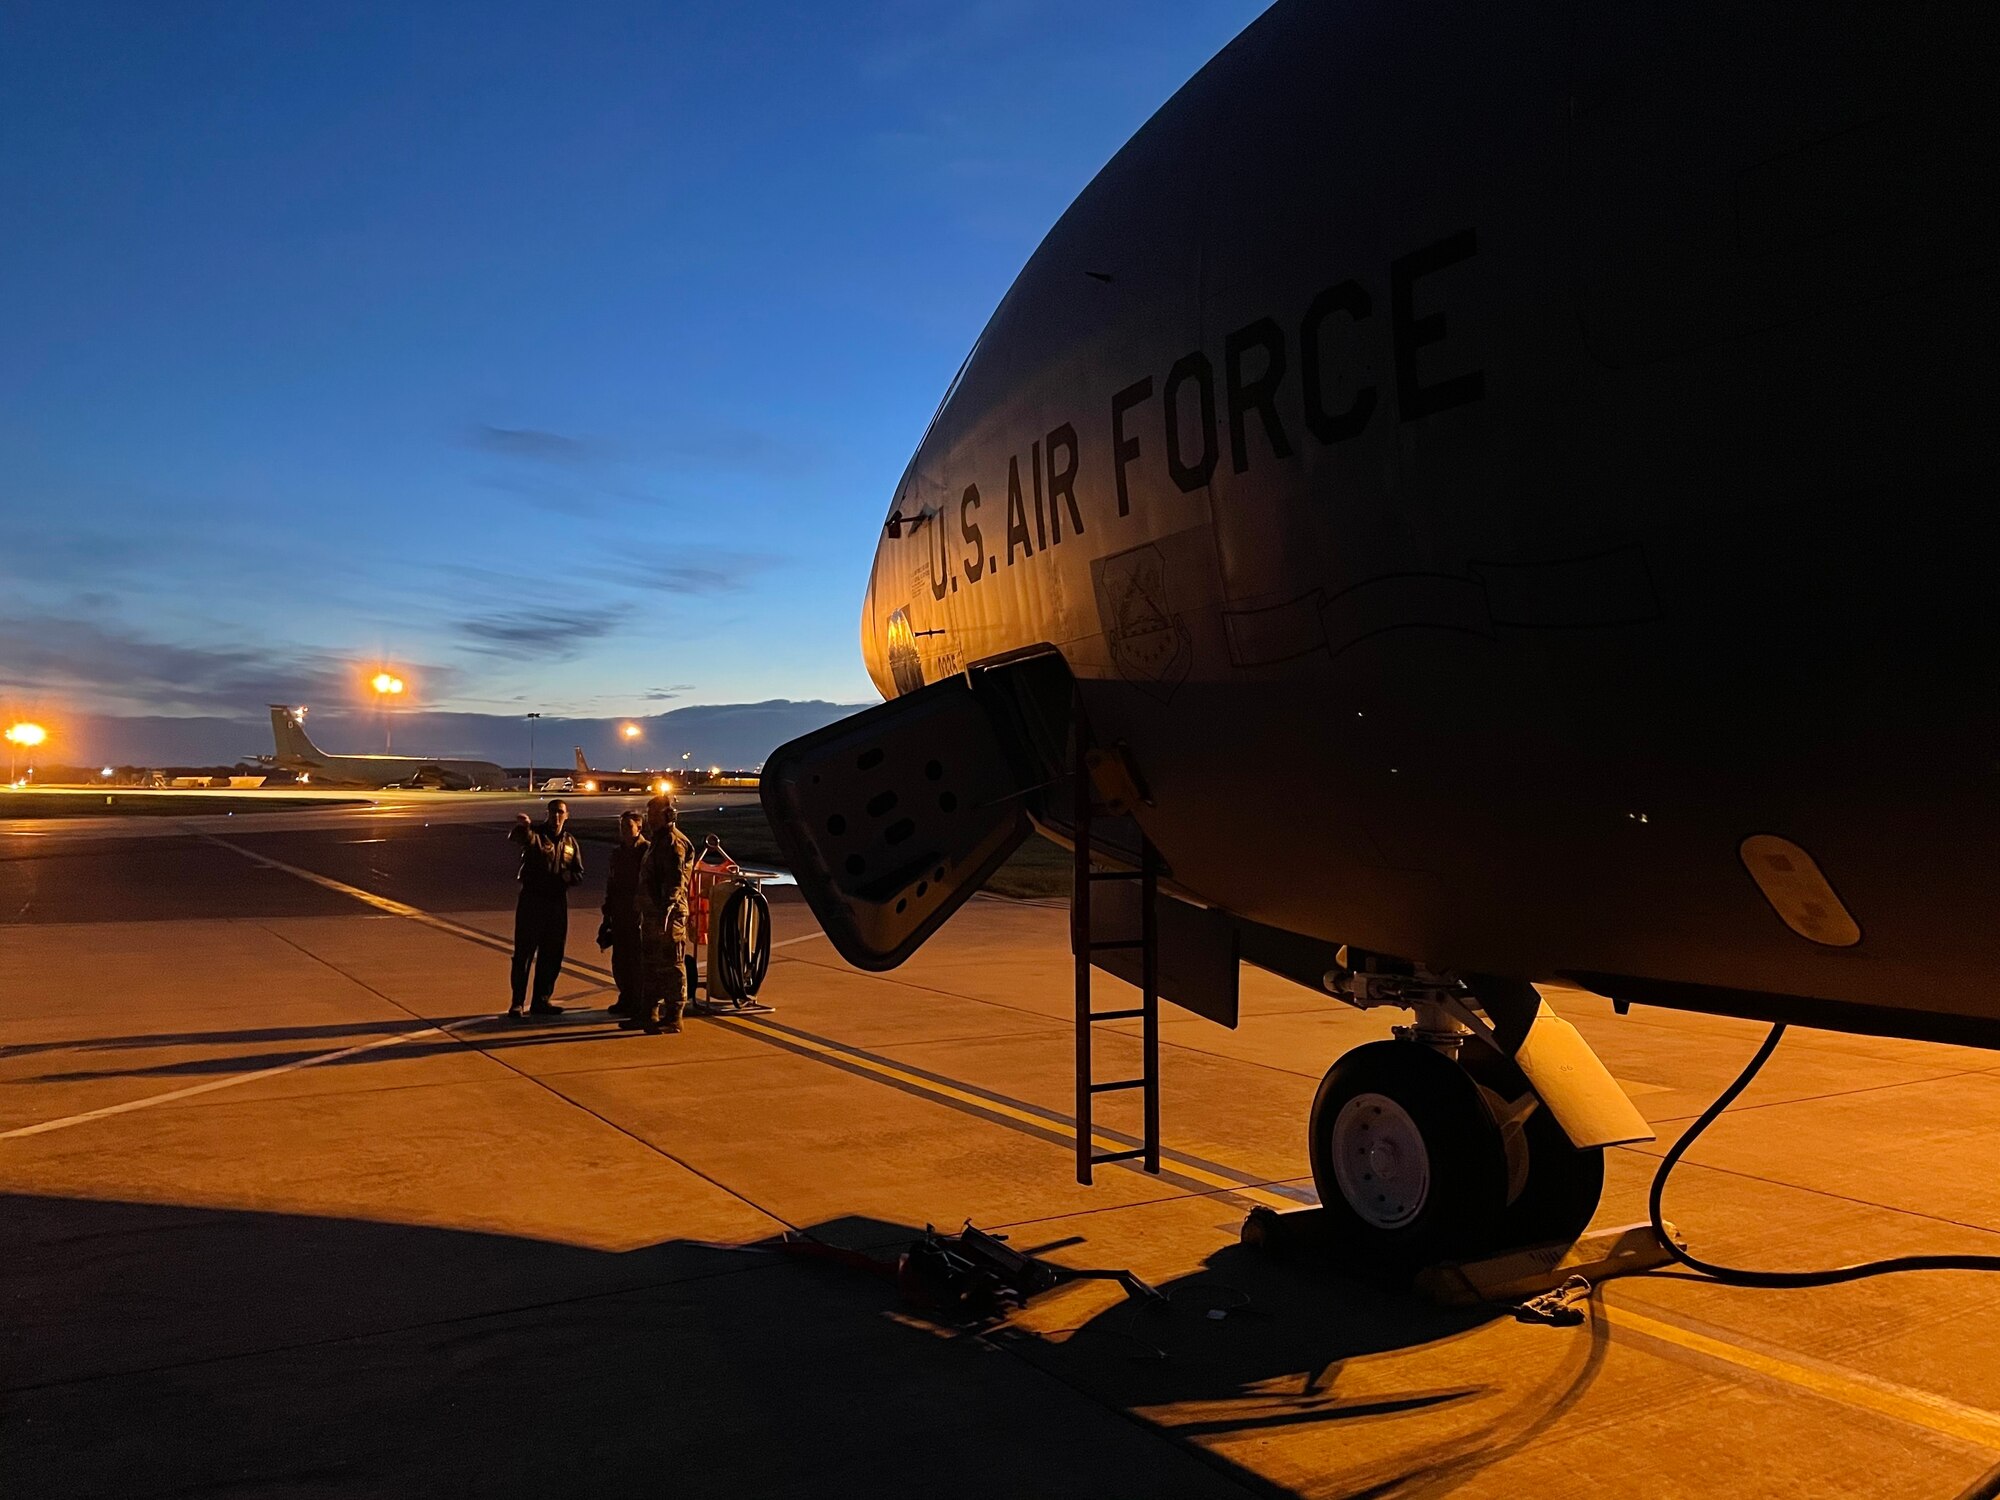 U.S. Airmen assigned to the 100th Air Refueling Wing conduct a preflight walk-around of a KC-135 Stratotanker aircraft before conducting a refueling mission during exercise Castle Forge at Royal Air Force Mildenhall, England, Nov. 1, 2021. The U.S. Air Force’s forward-deployed forces are engaged, postured and ready with credible force to assure, deter and defend in an increasingly complex security environment. Alongside F-15 operations in the Black Sea Region, Castle Forge encompasses the USAFE MAJCOM-wide Agile Combat Employment Initial Operating Capability capstone event. Both Castle Forge’s components will better enable forces to quickly disperse and continue to deliver air power from locations with varying levels of capacity and support, ensuring Airmen are always ready to respond to potential threats. (U.S. Air Force photo by Senior Airman Joseph Barron)